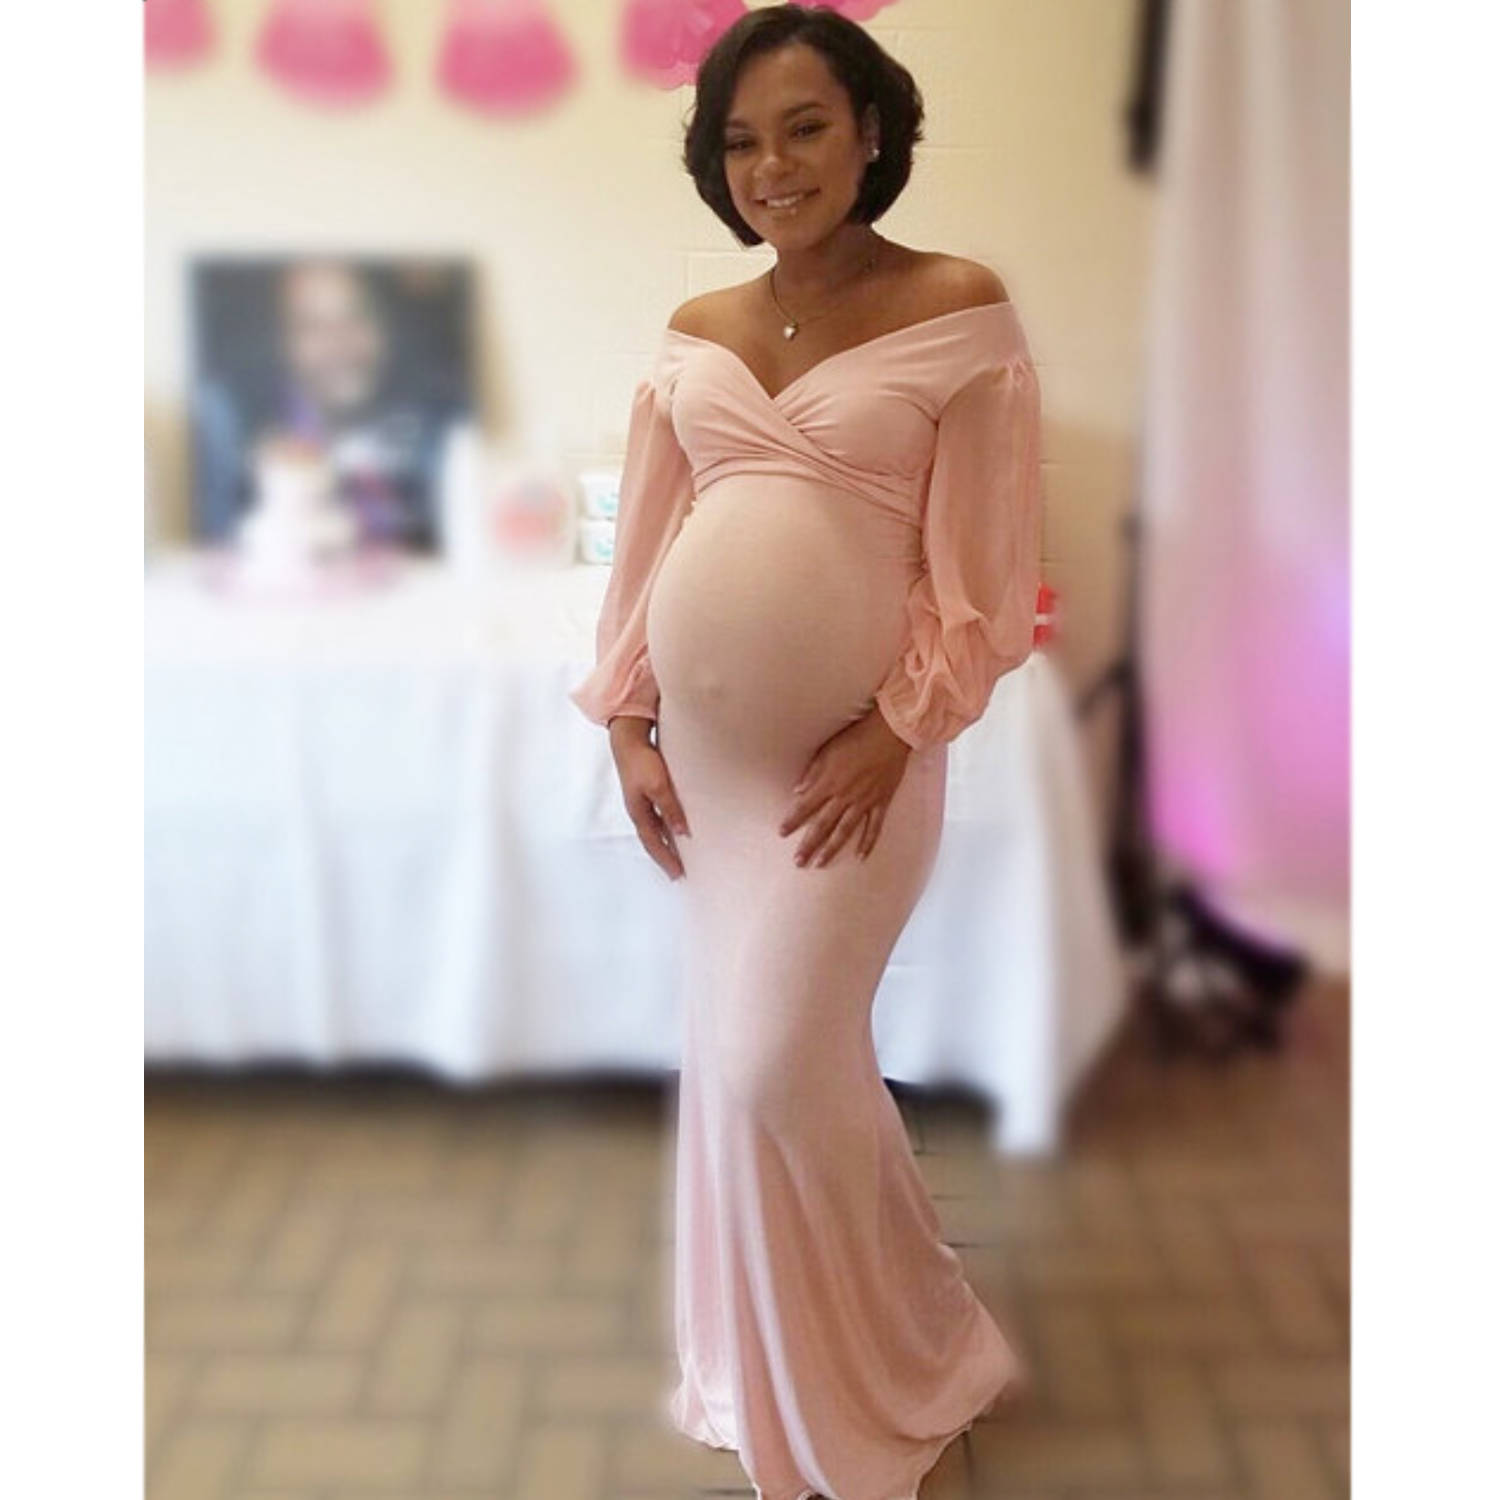 Full Size of Baby Shower:what Should I Wear To My Baby Shower Cute Baby Shower Outfits For Mom Stylish Maternity Dresses For Baby Shower Maternity Clothes Target A Pea In The Pod Maternity Clothes Maternity Dresses Formal 2 Searches Left. What Should I Wear To My Baby Shower